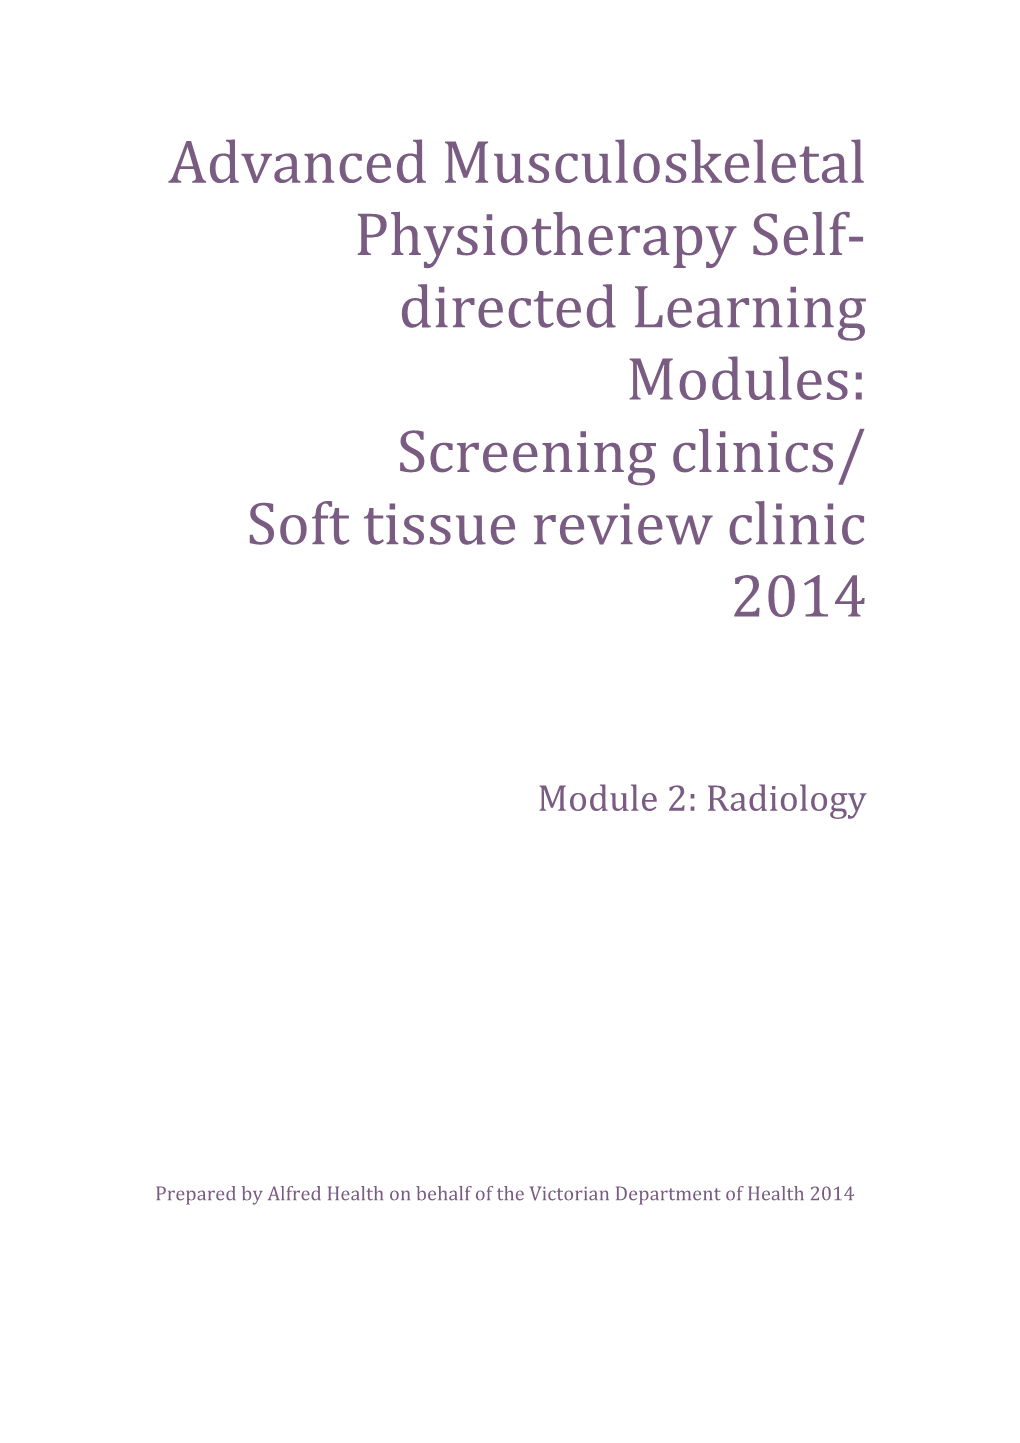 Advanced Musculoskeletal Physiotherapy Self-Directed Learning Modules